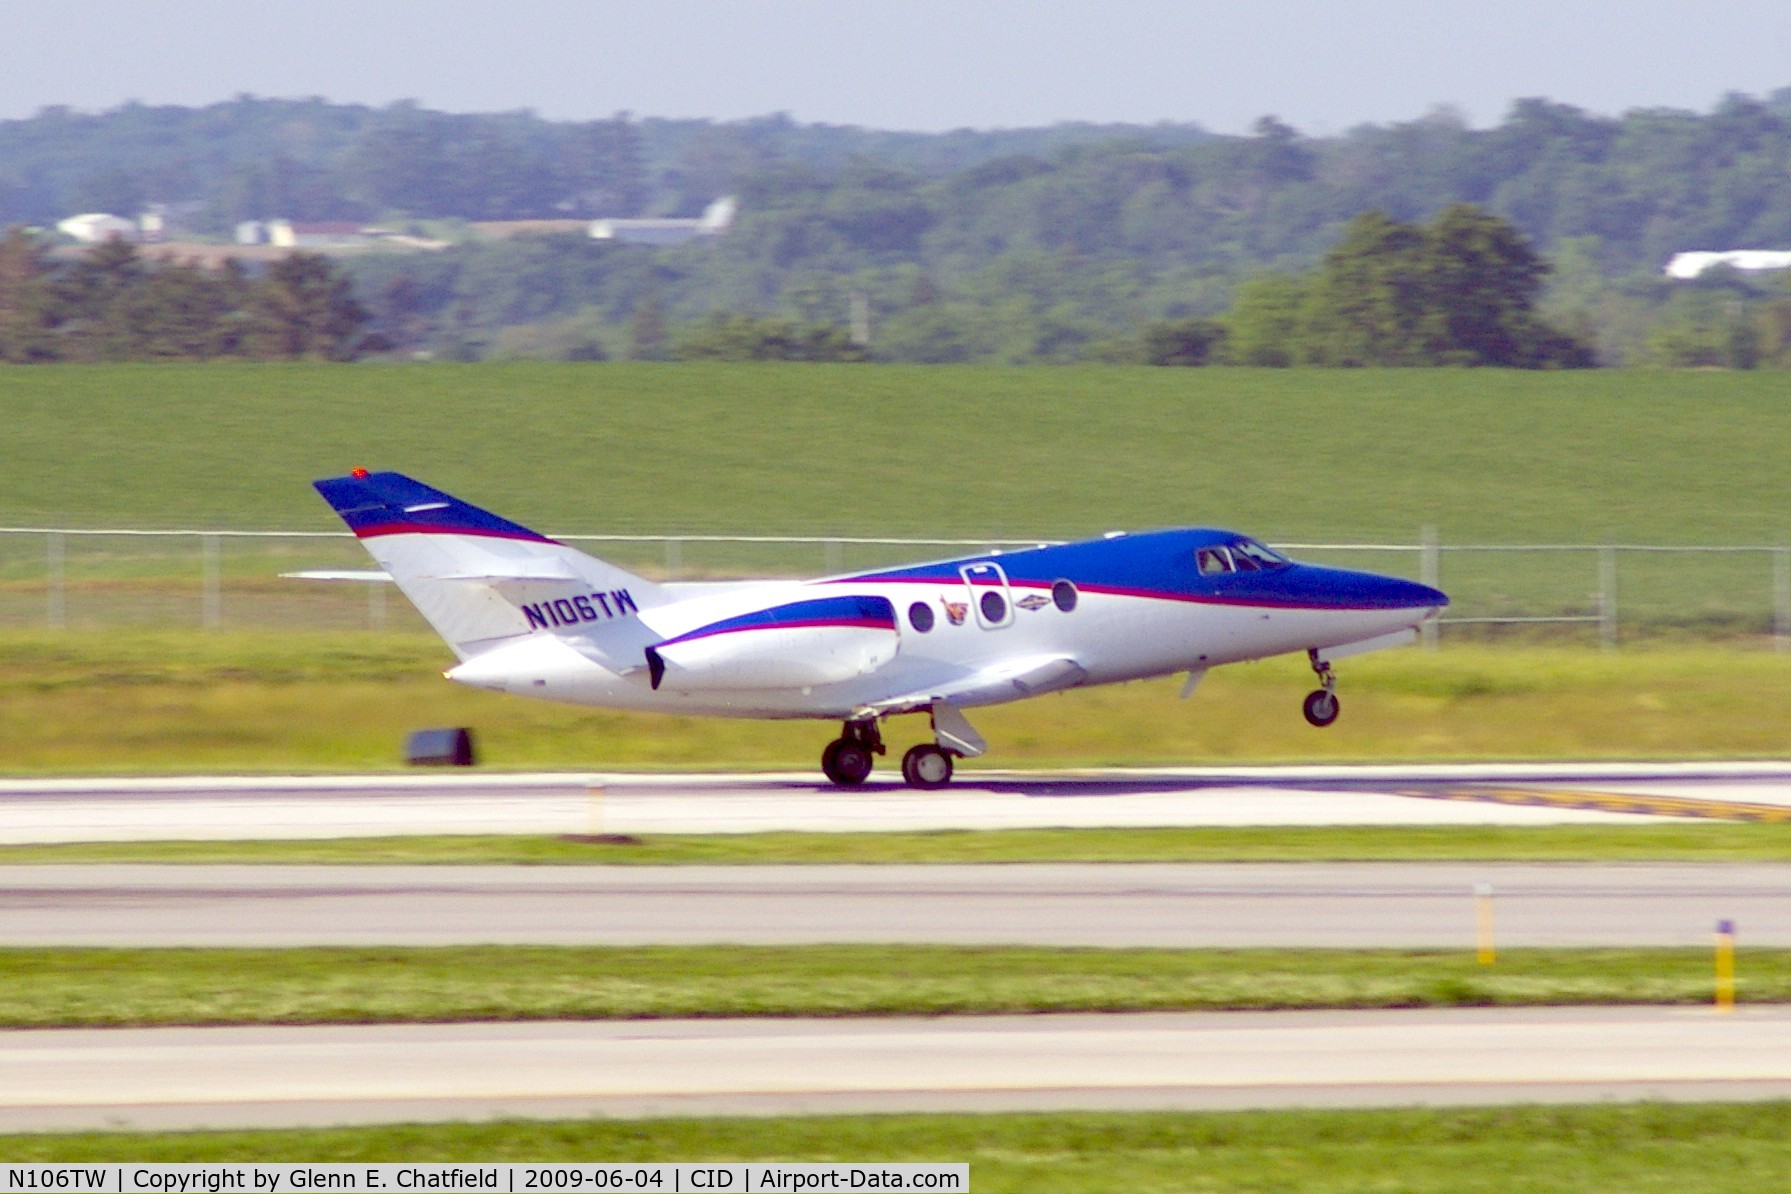 N106TW, 1976 Dassault Falcon 10 C/N 84, Rotating on the take-off roll on Runway 27